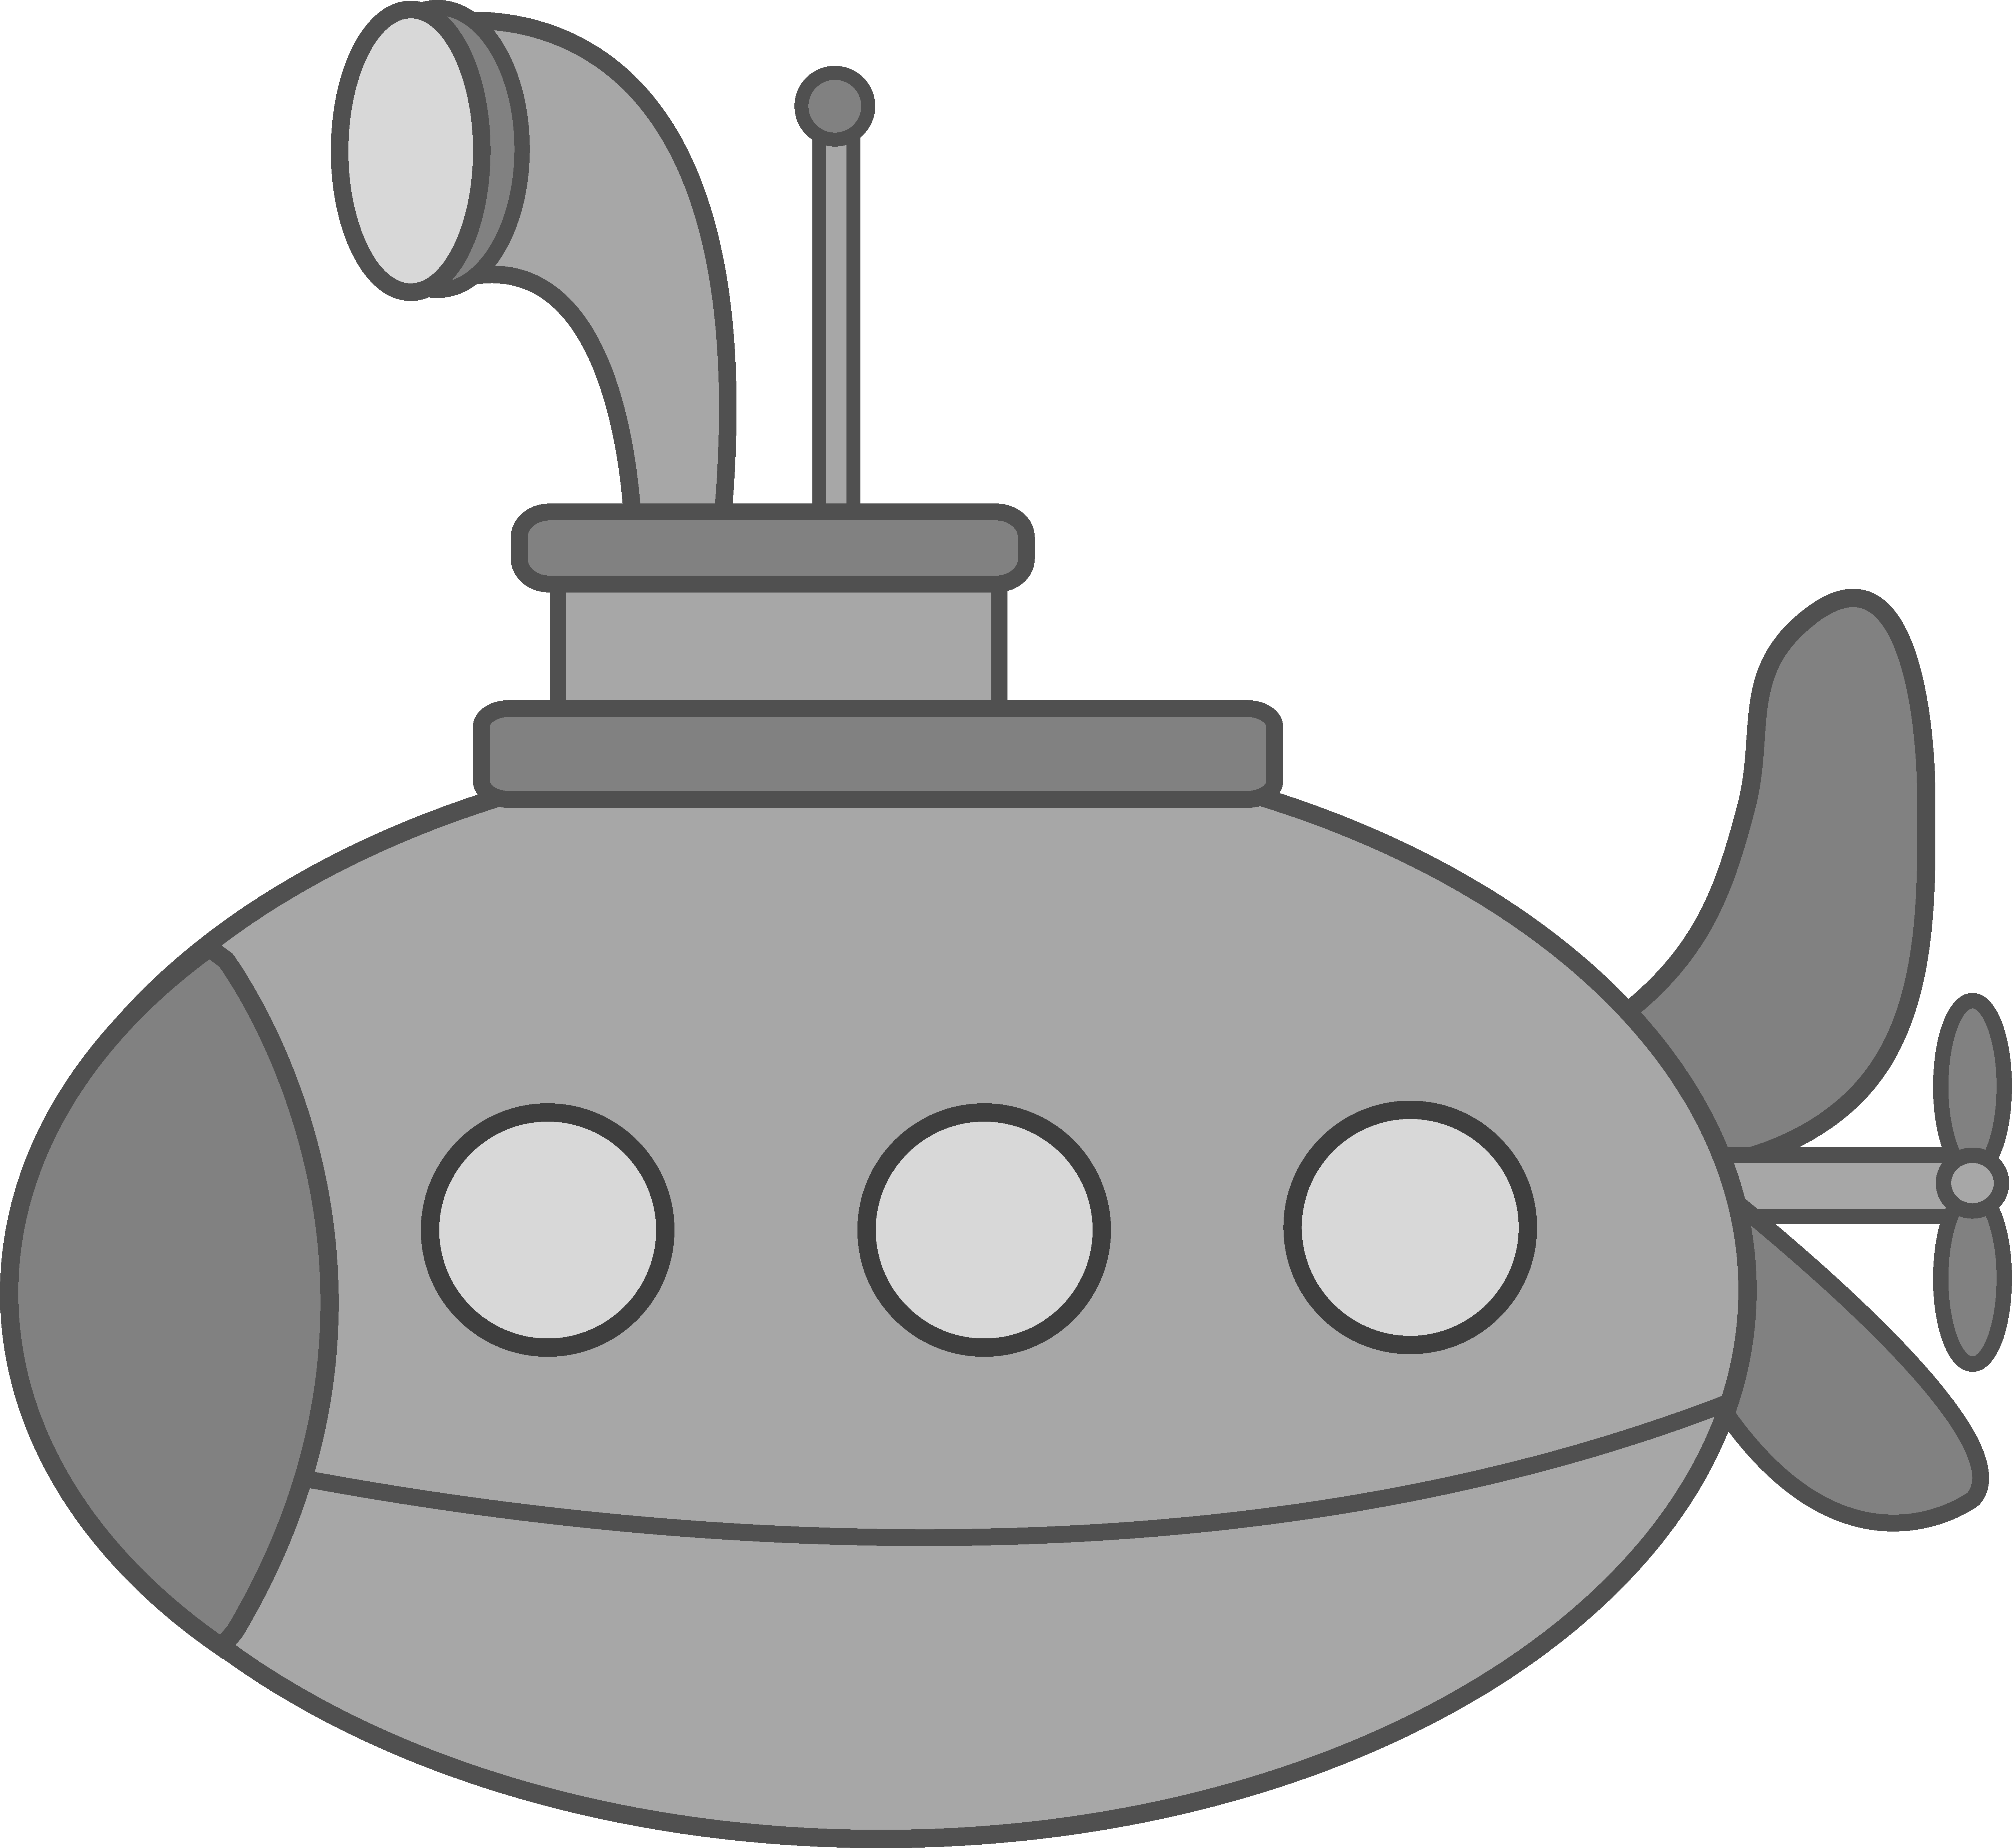 Submarine clipart printable. For free images 